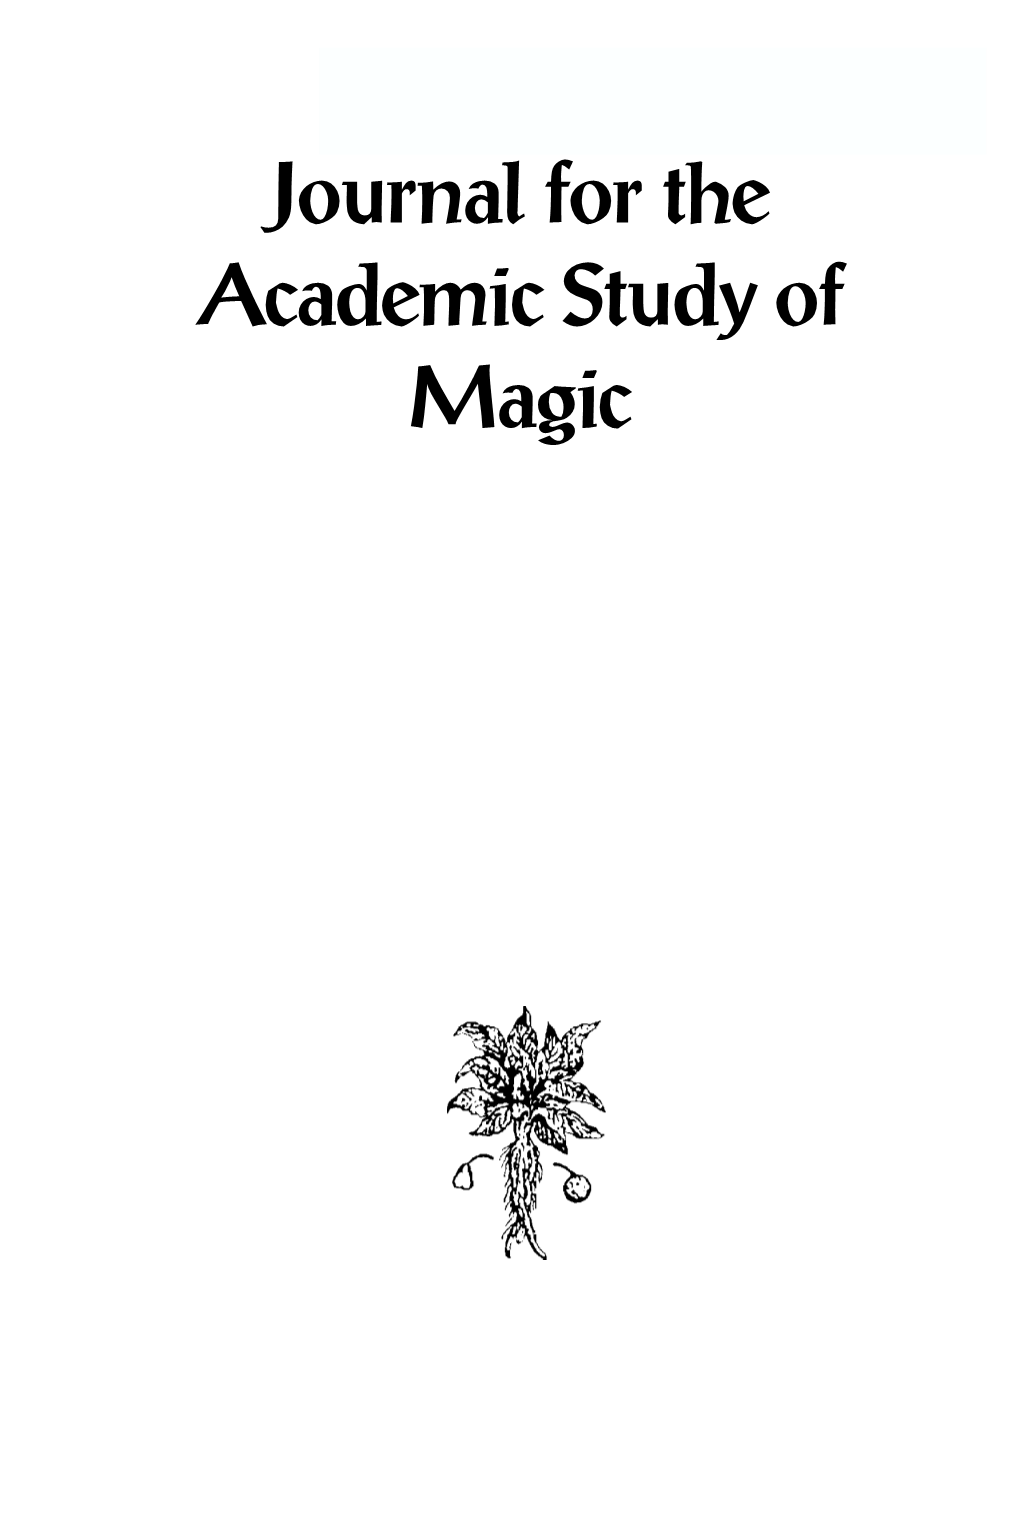 Journal for the Academic Study of Magic 1 Journal for the Academic Study of Magic 2 Journal for the Academic Study of Magic - Issue 4